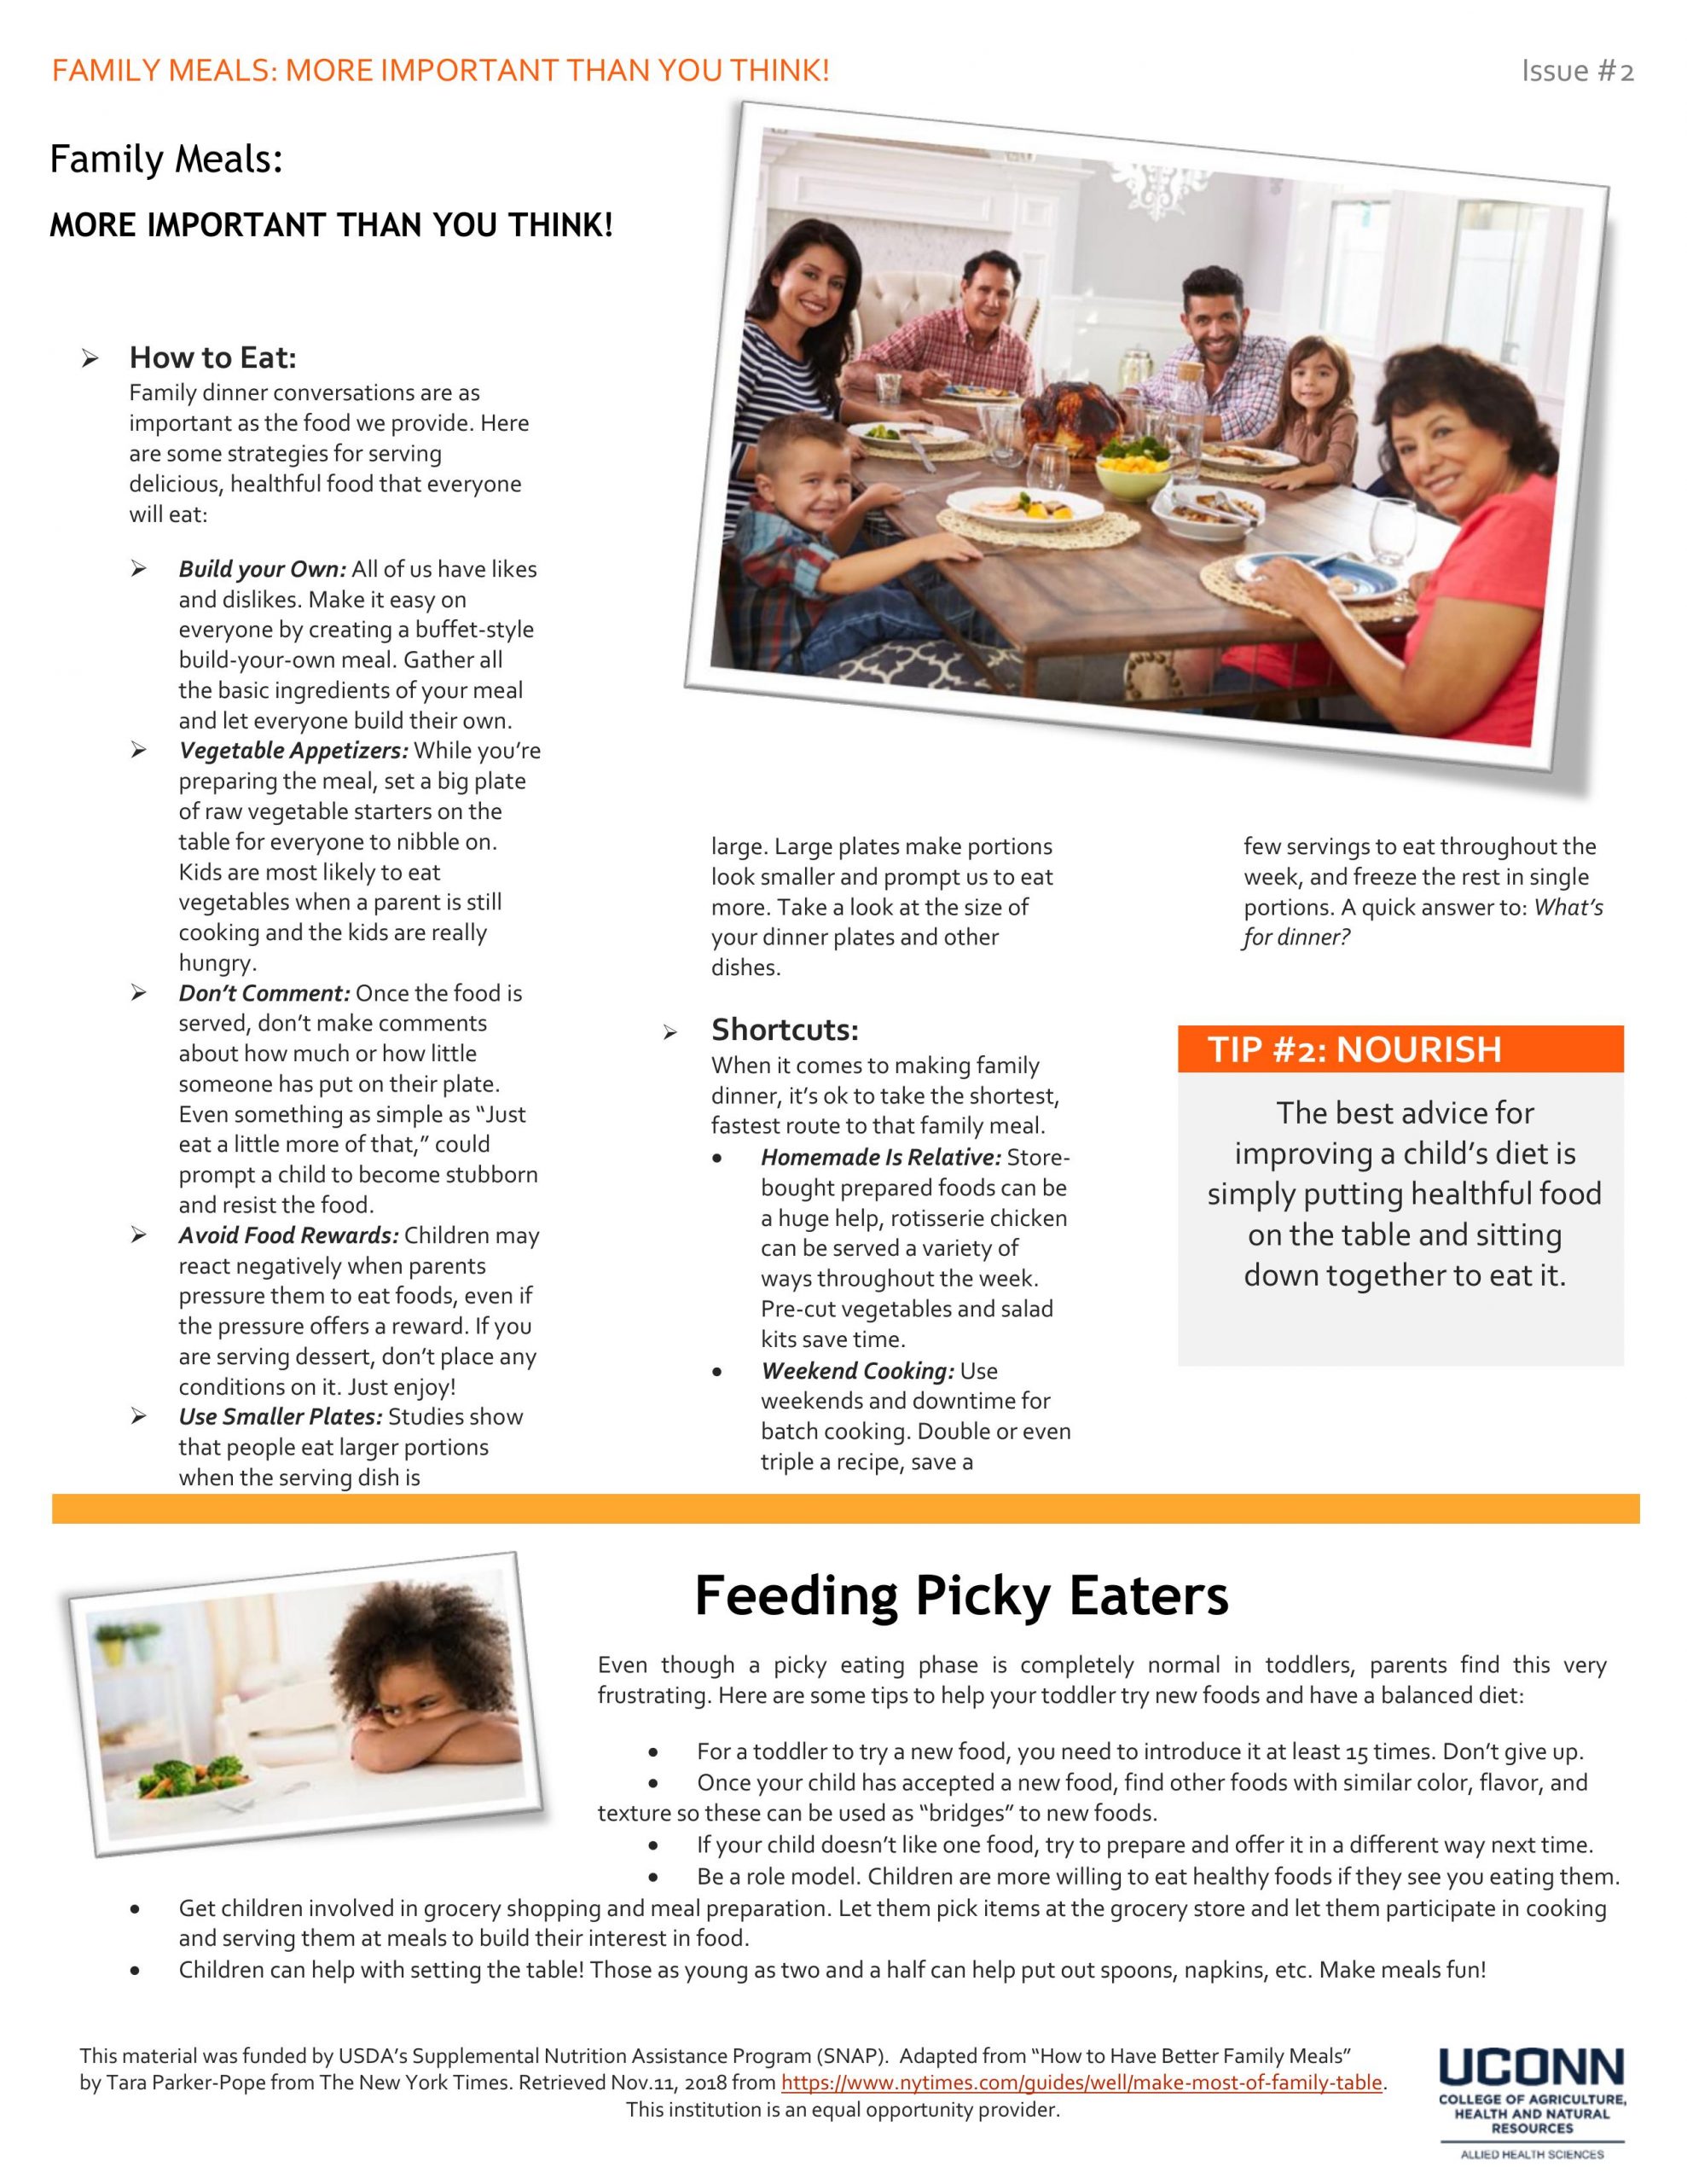 Family meals tip sheet